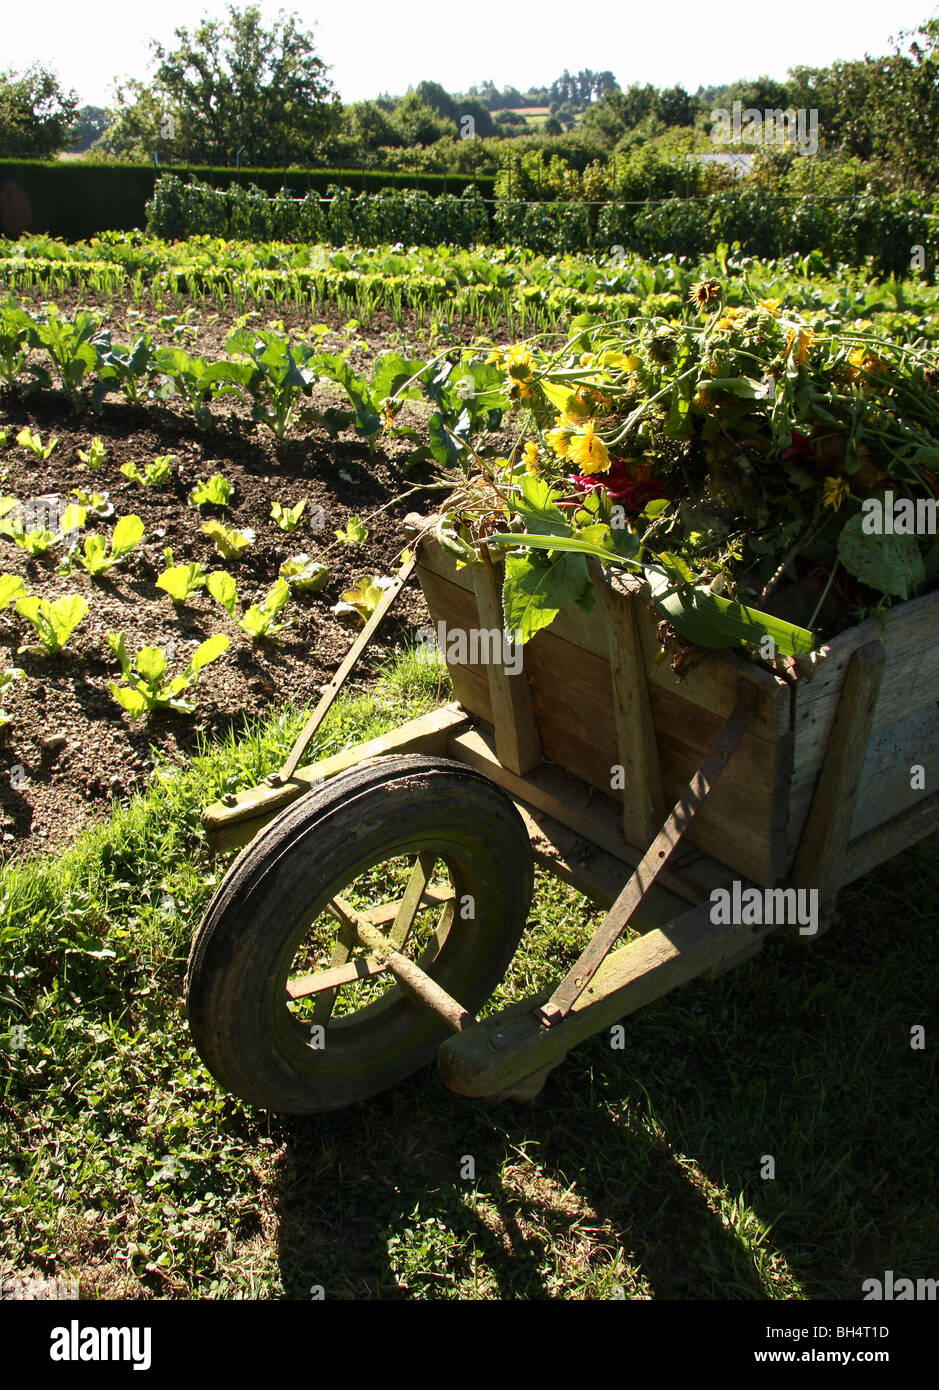 Rows of vegetables in a well tended garden with old wooden wheelbarrow in the foreground. Stock Photo